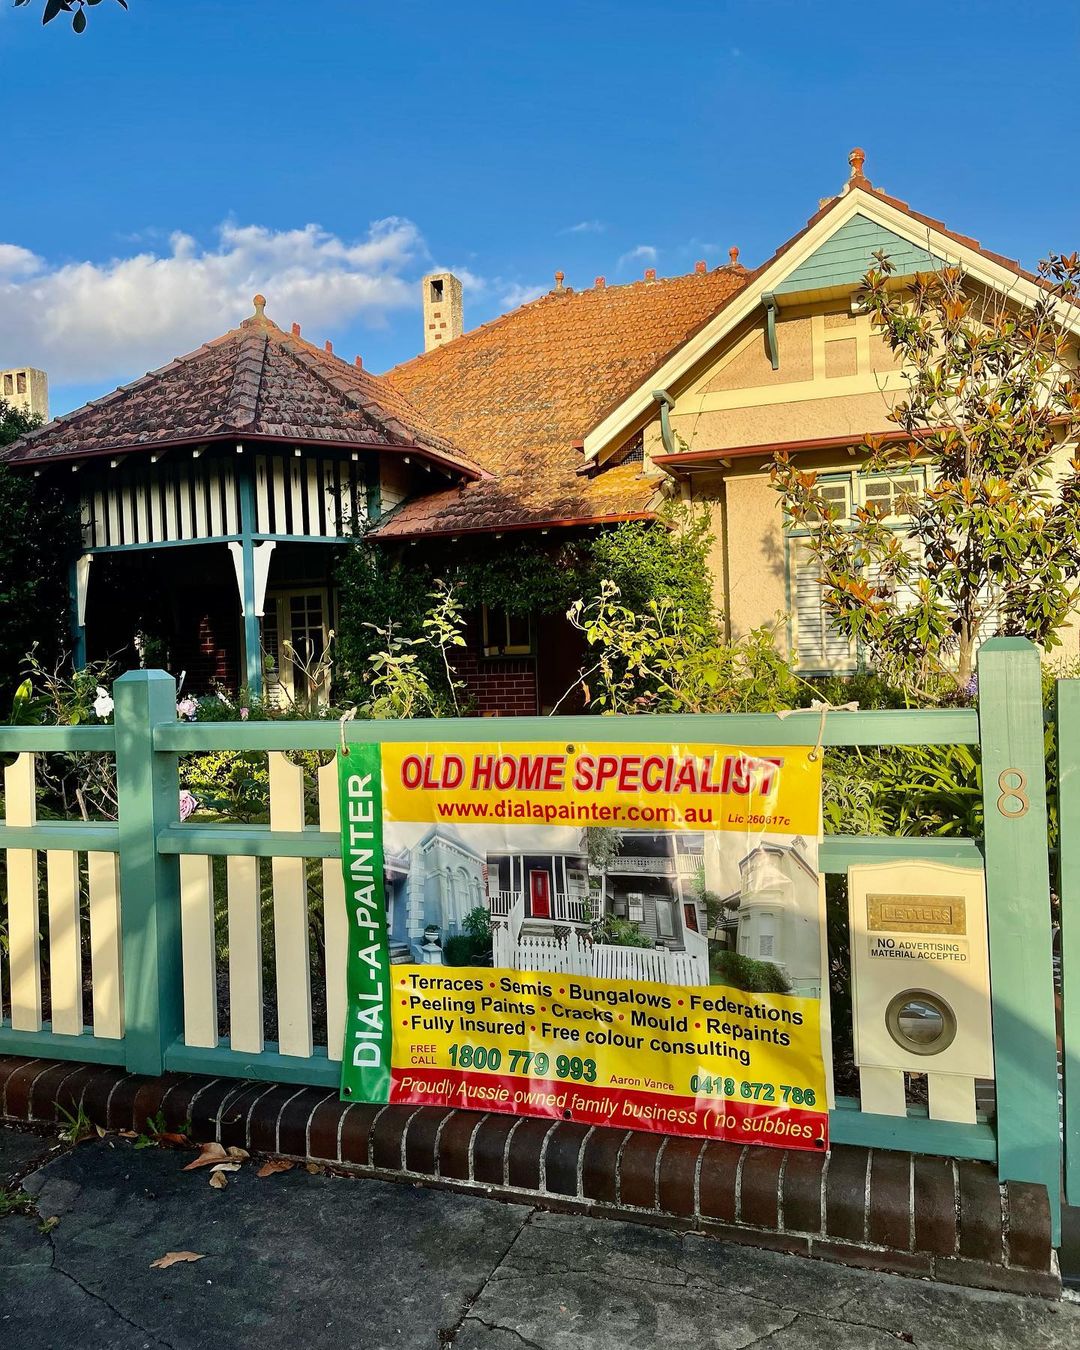 Sydney’s old homes specialists Follow o